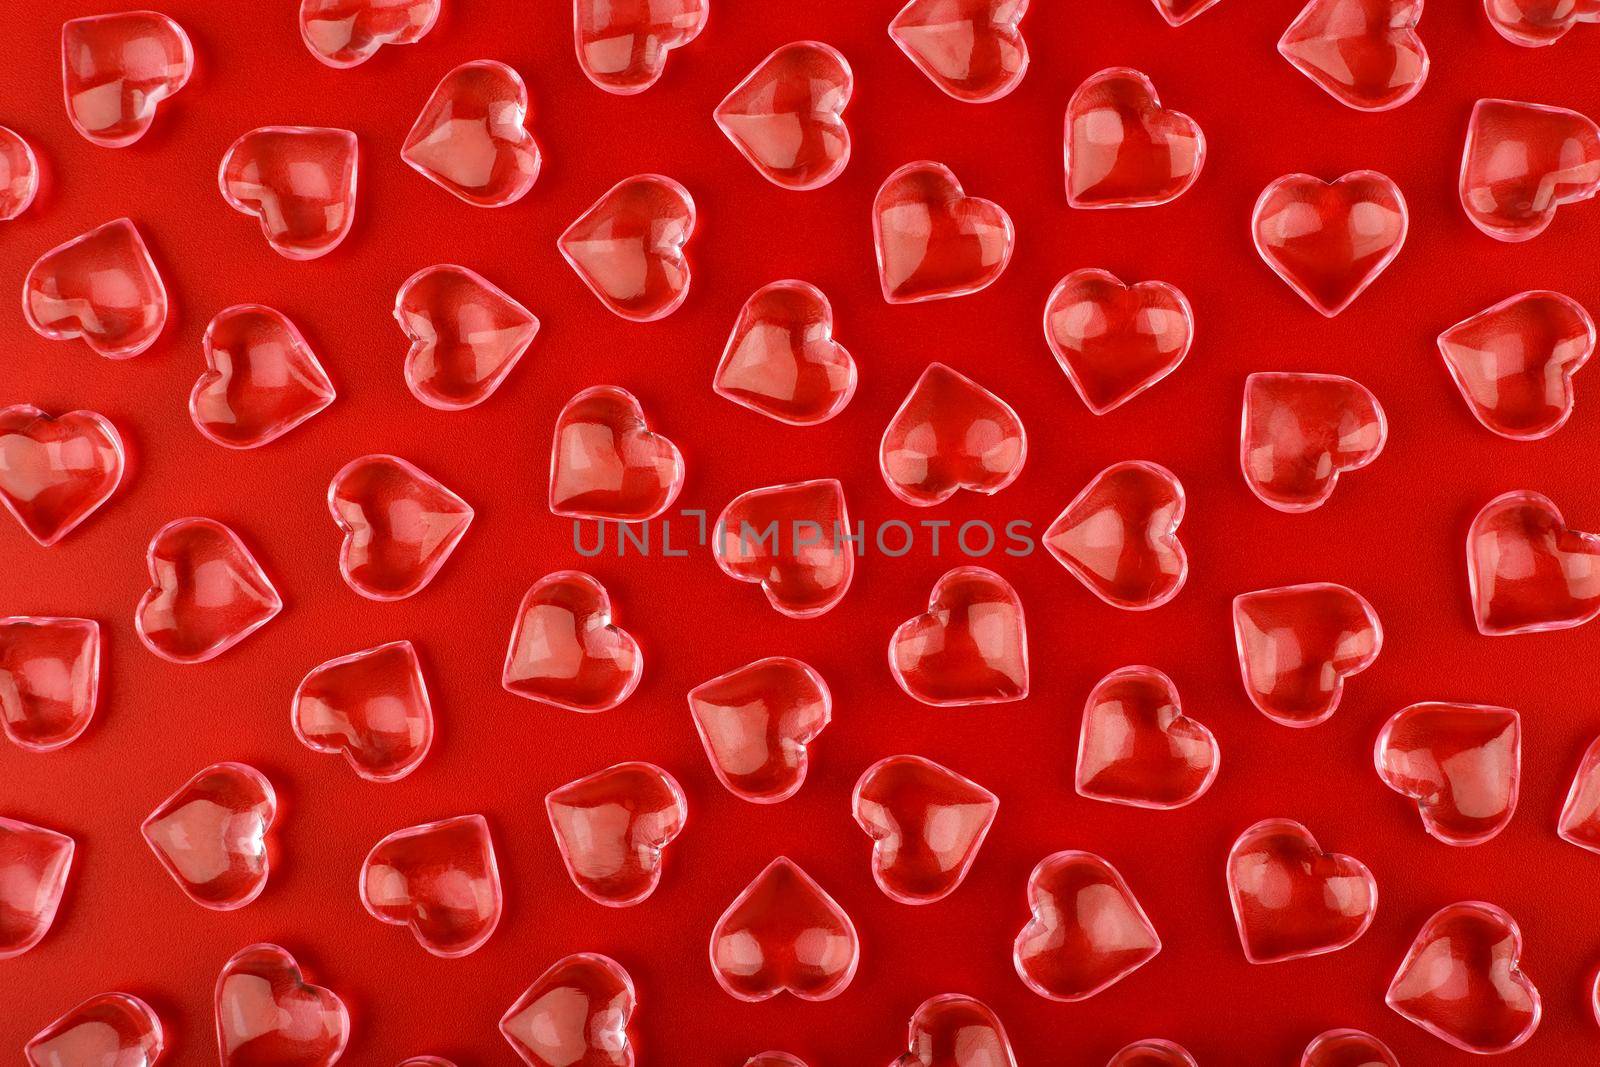  Top view of transparent glossy glass hearts. Minimalistic background template for love or St. Valentine's day concept. 